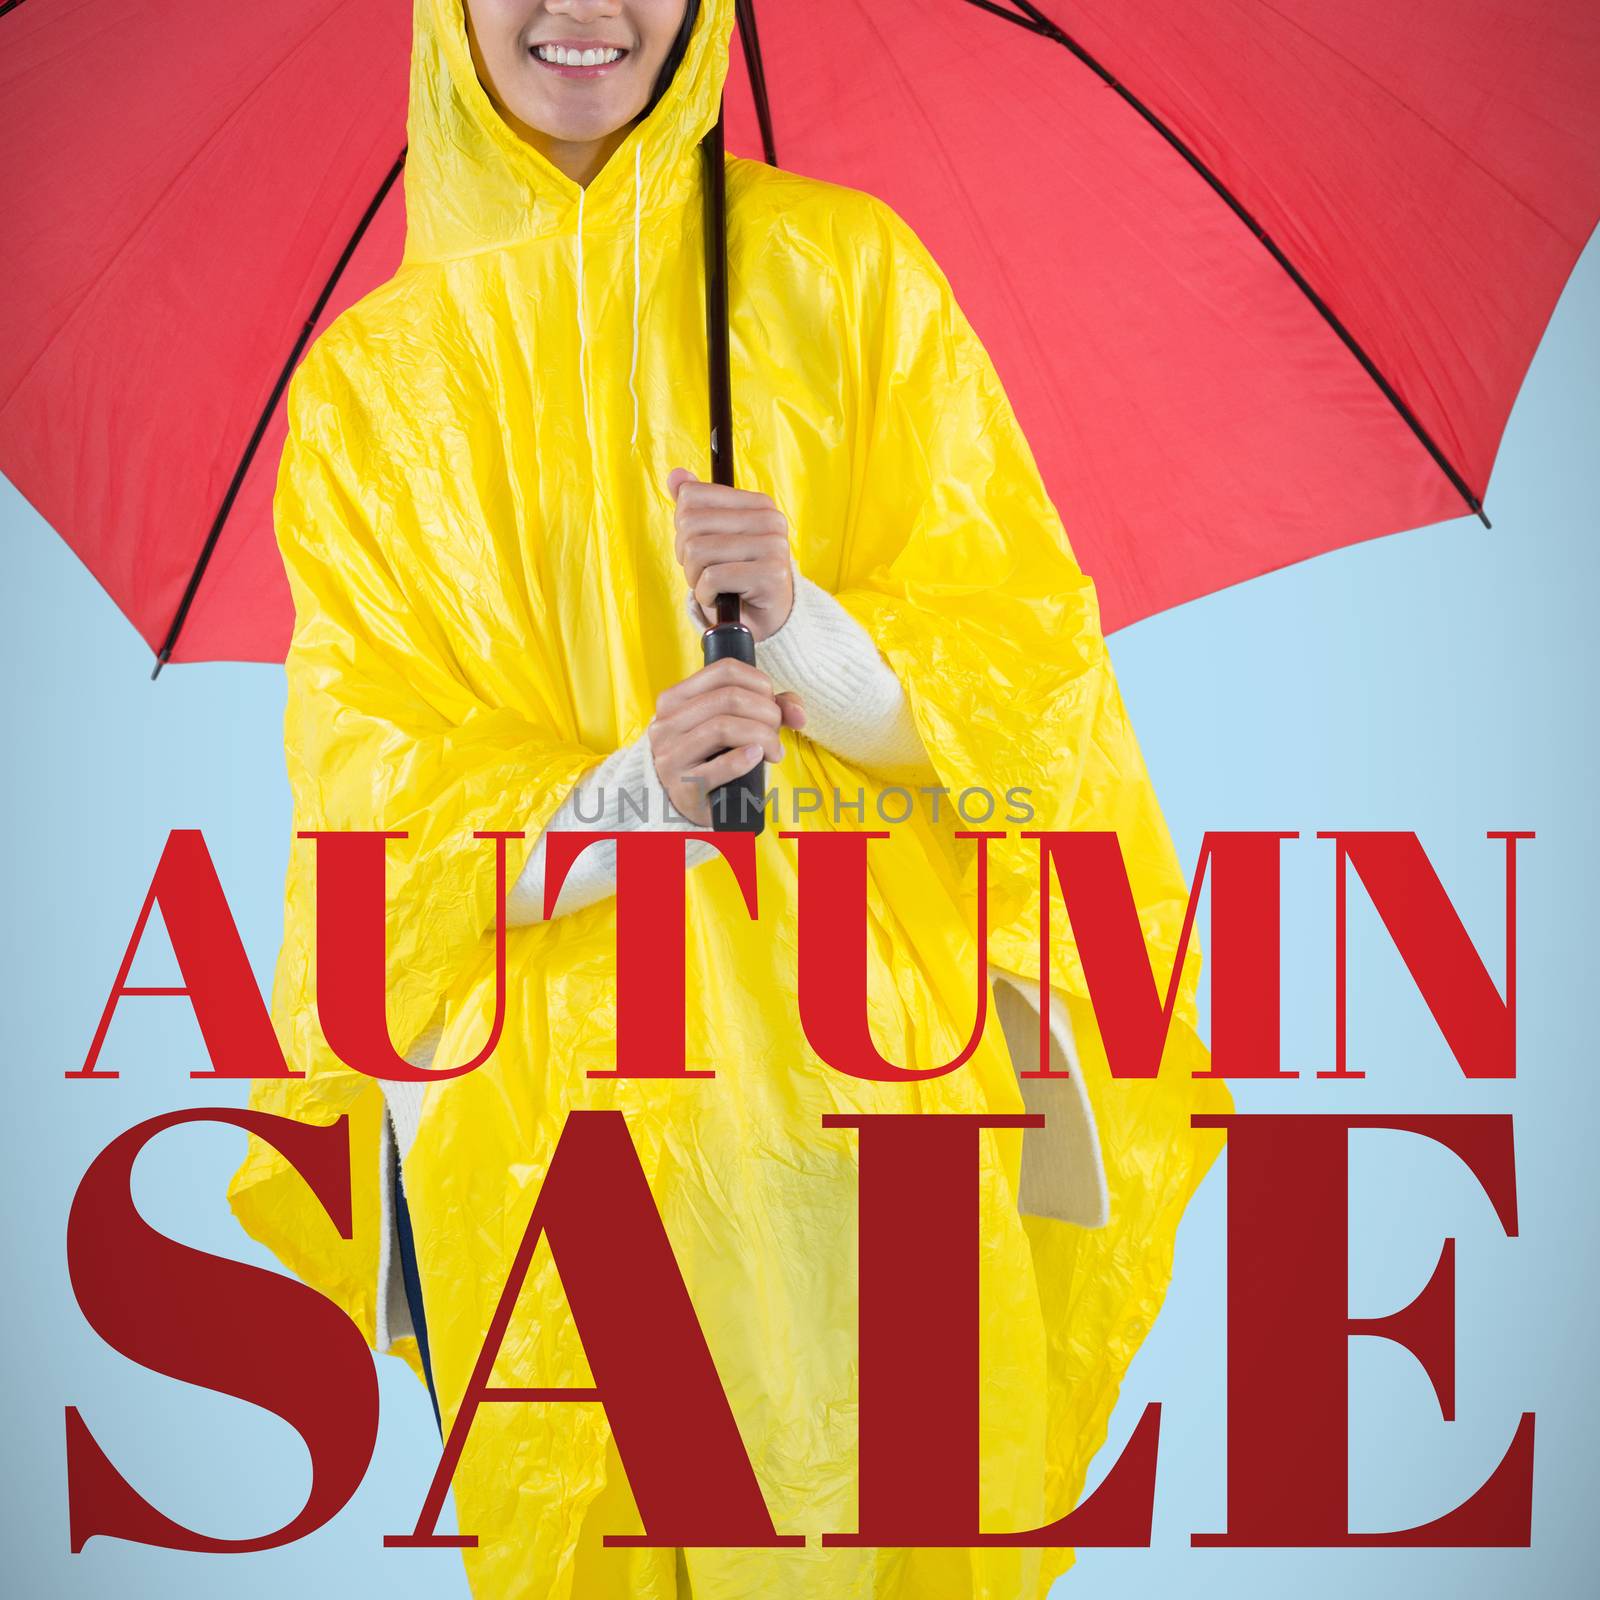 Woman in yellow raincoat holding an umbrella against blue background